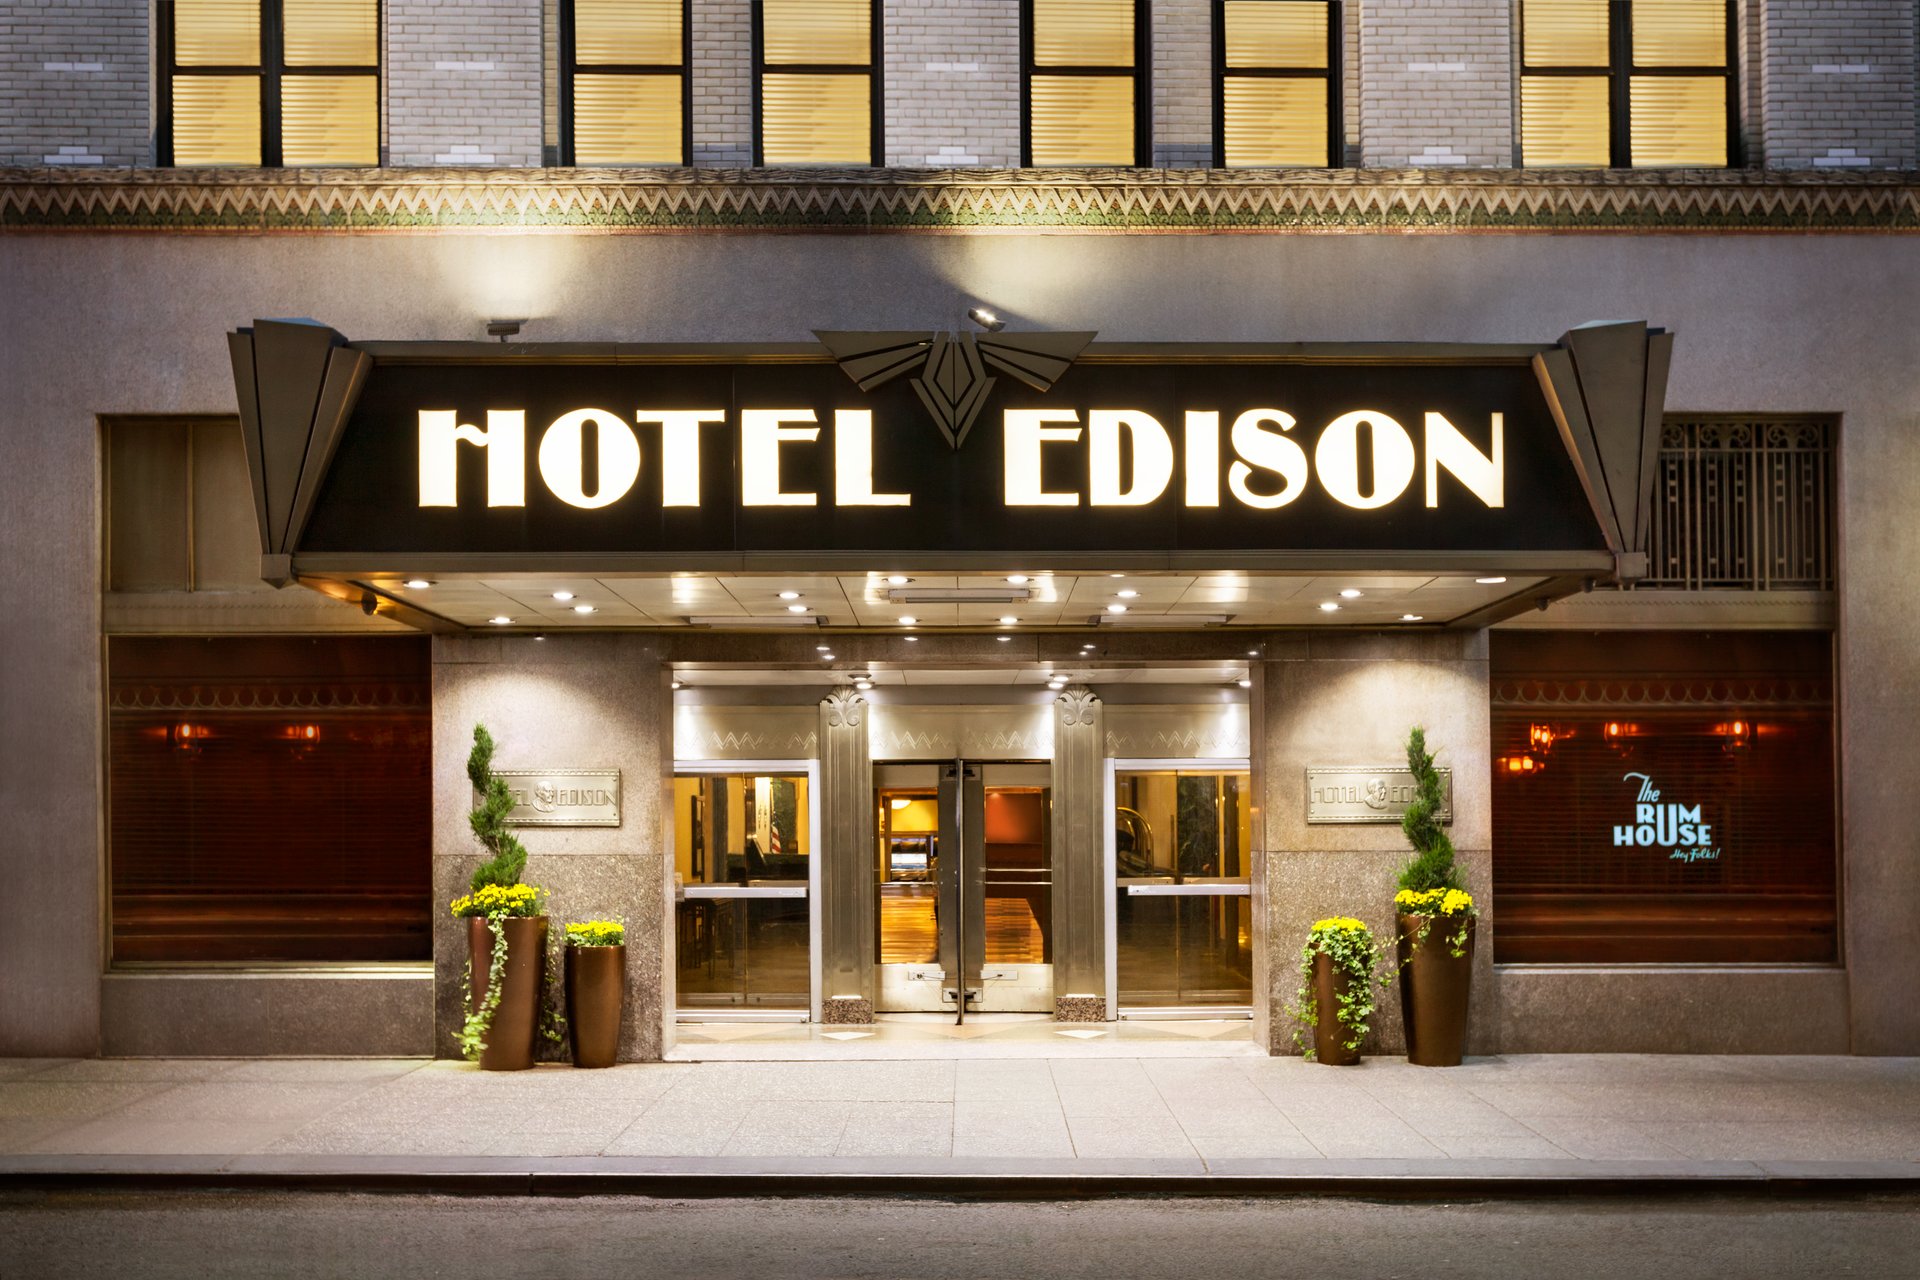 The Top 10 Art Deco Hotels in America by Laurel Fay Articles